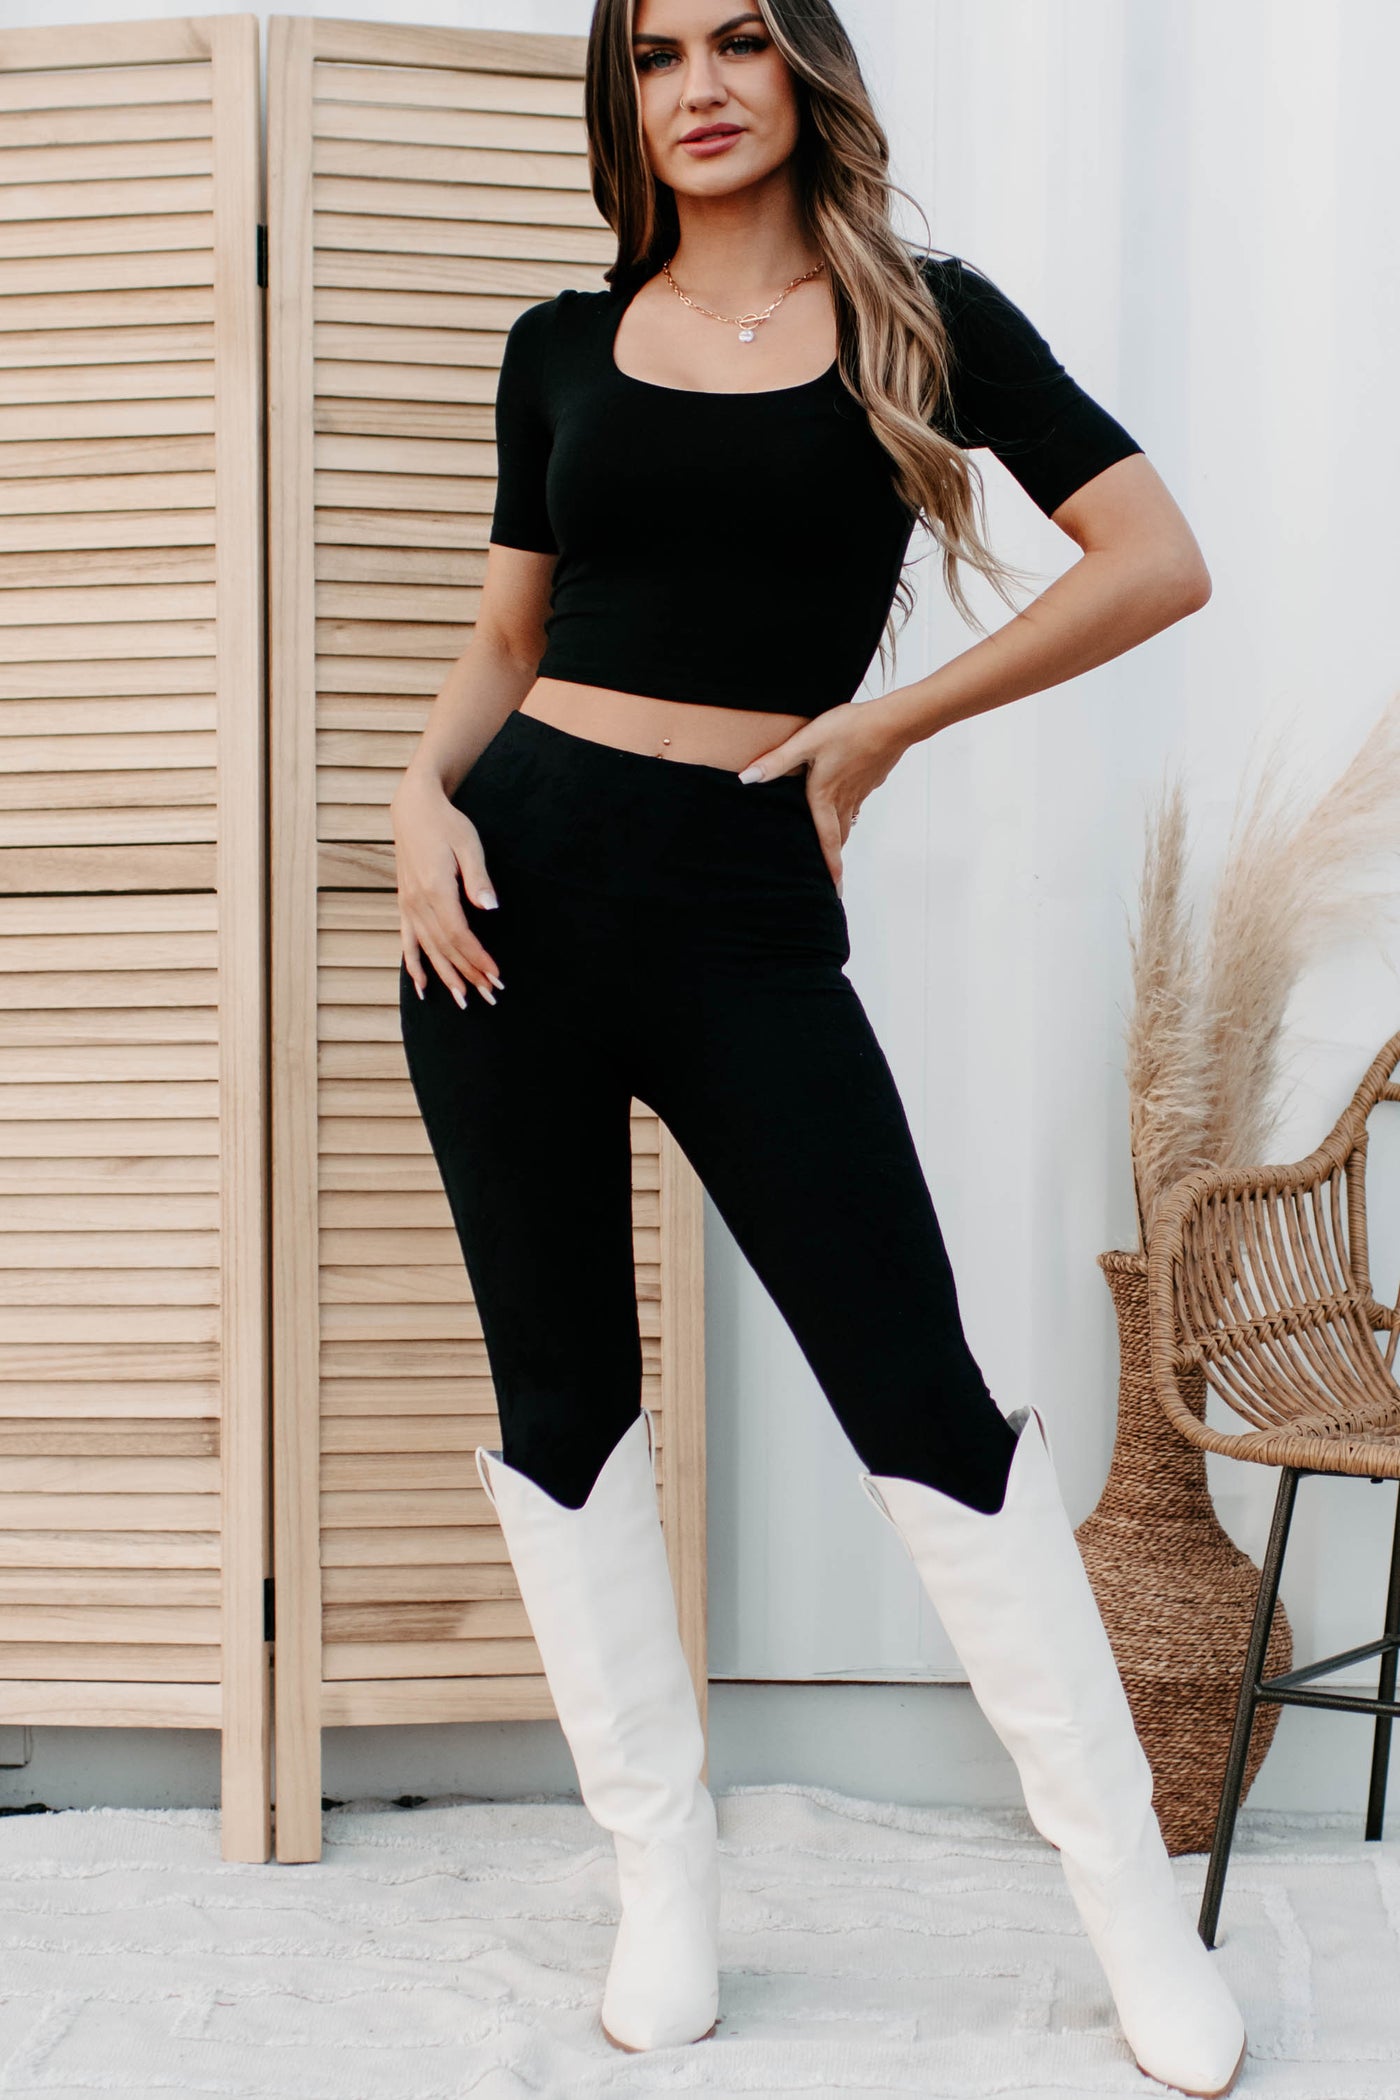 Extra Long Black Stretch Leggings  Made For Tall Women - HEIGHT-OF-FASHION